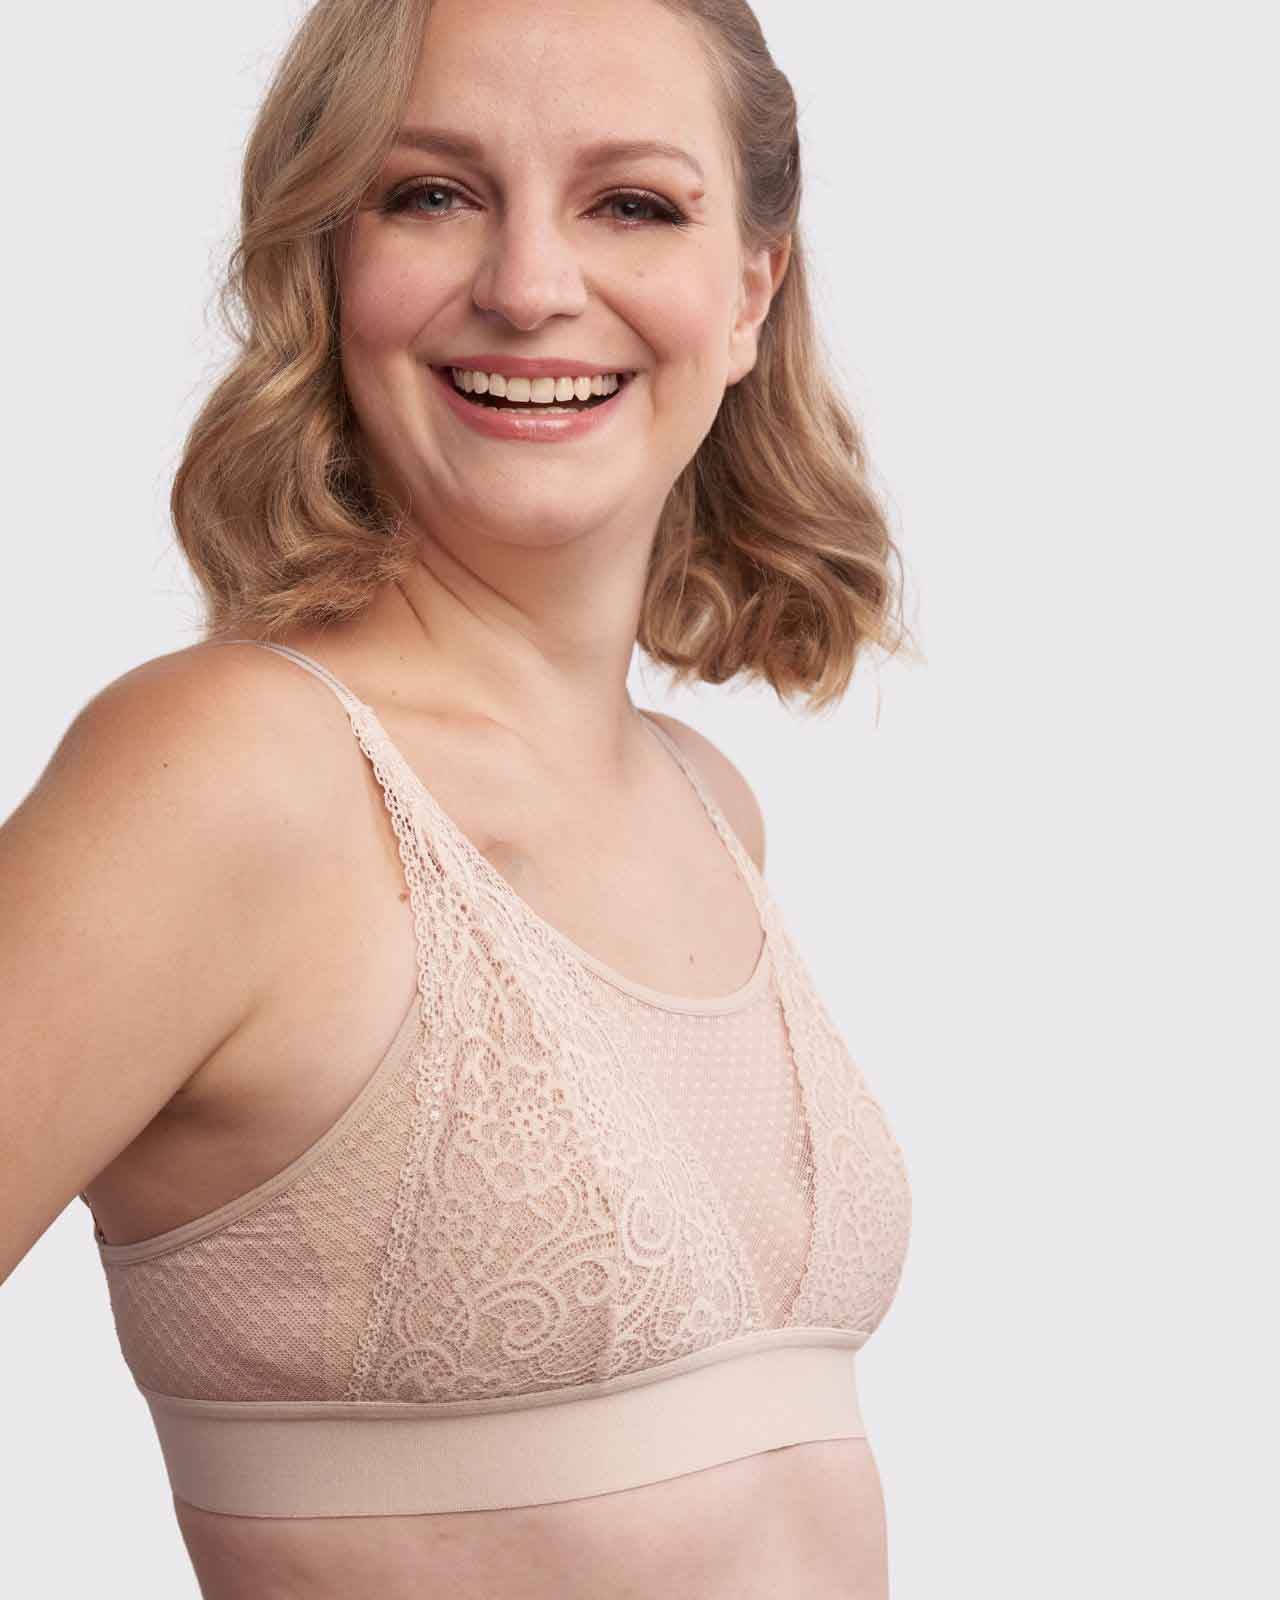 Body by Victoria high neck lace and crochet bralette